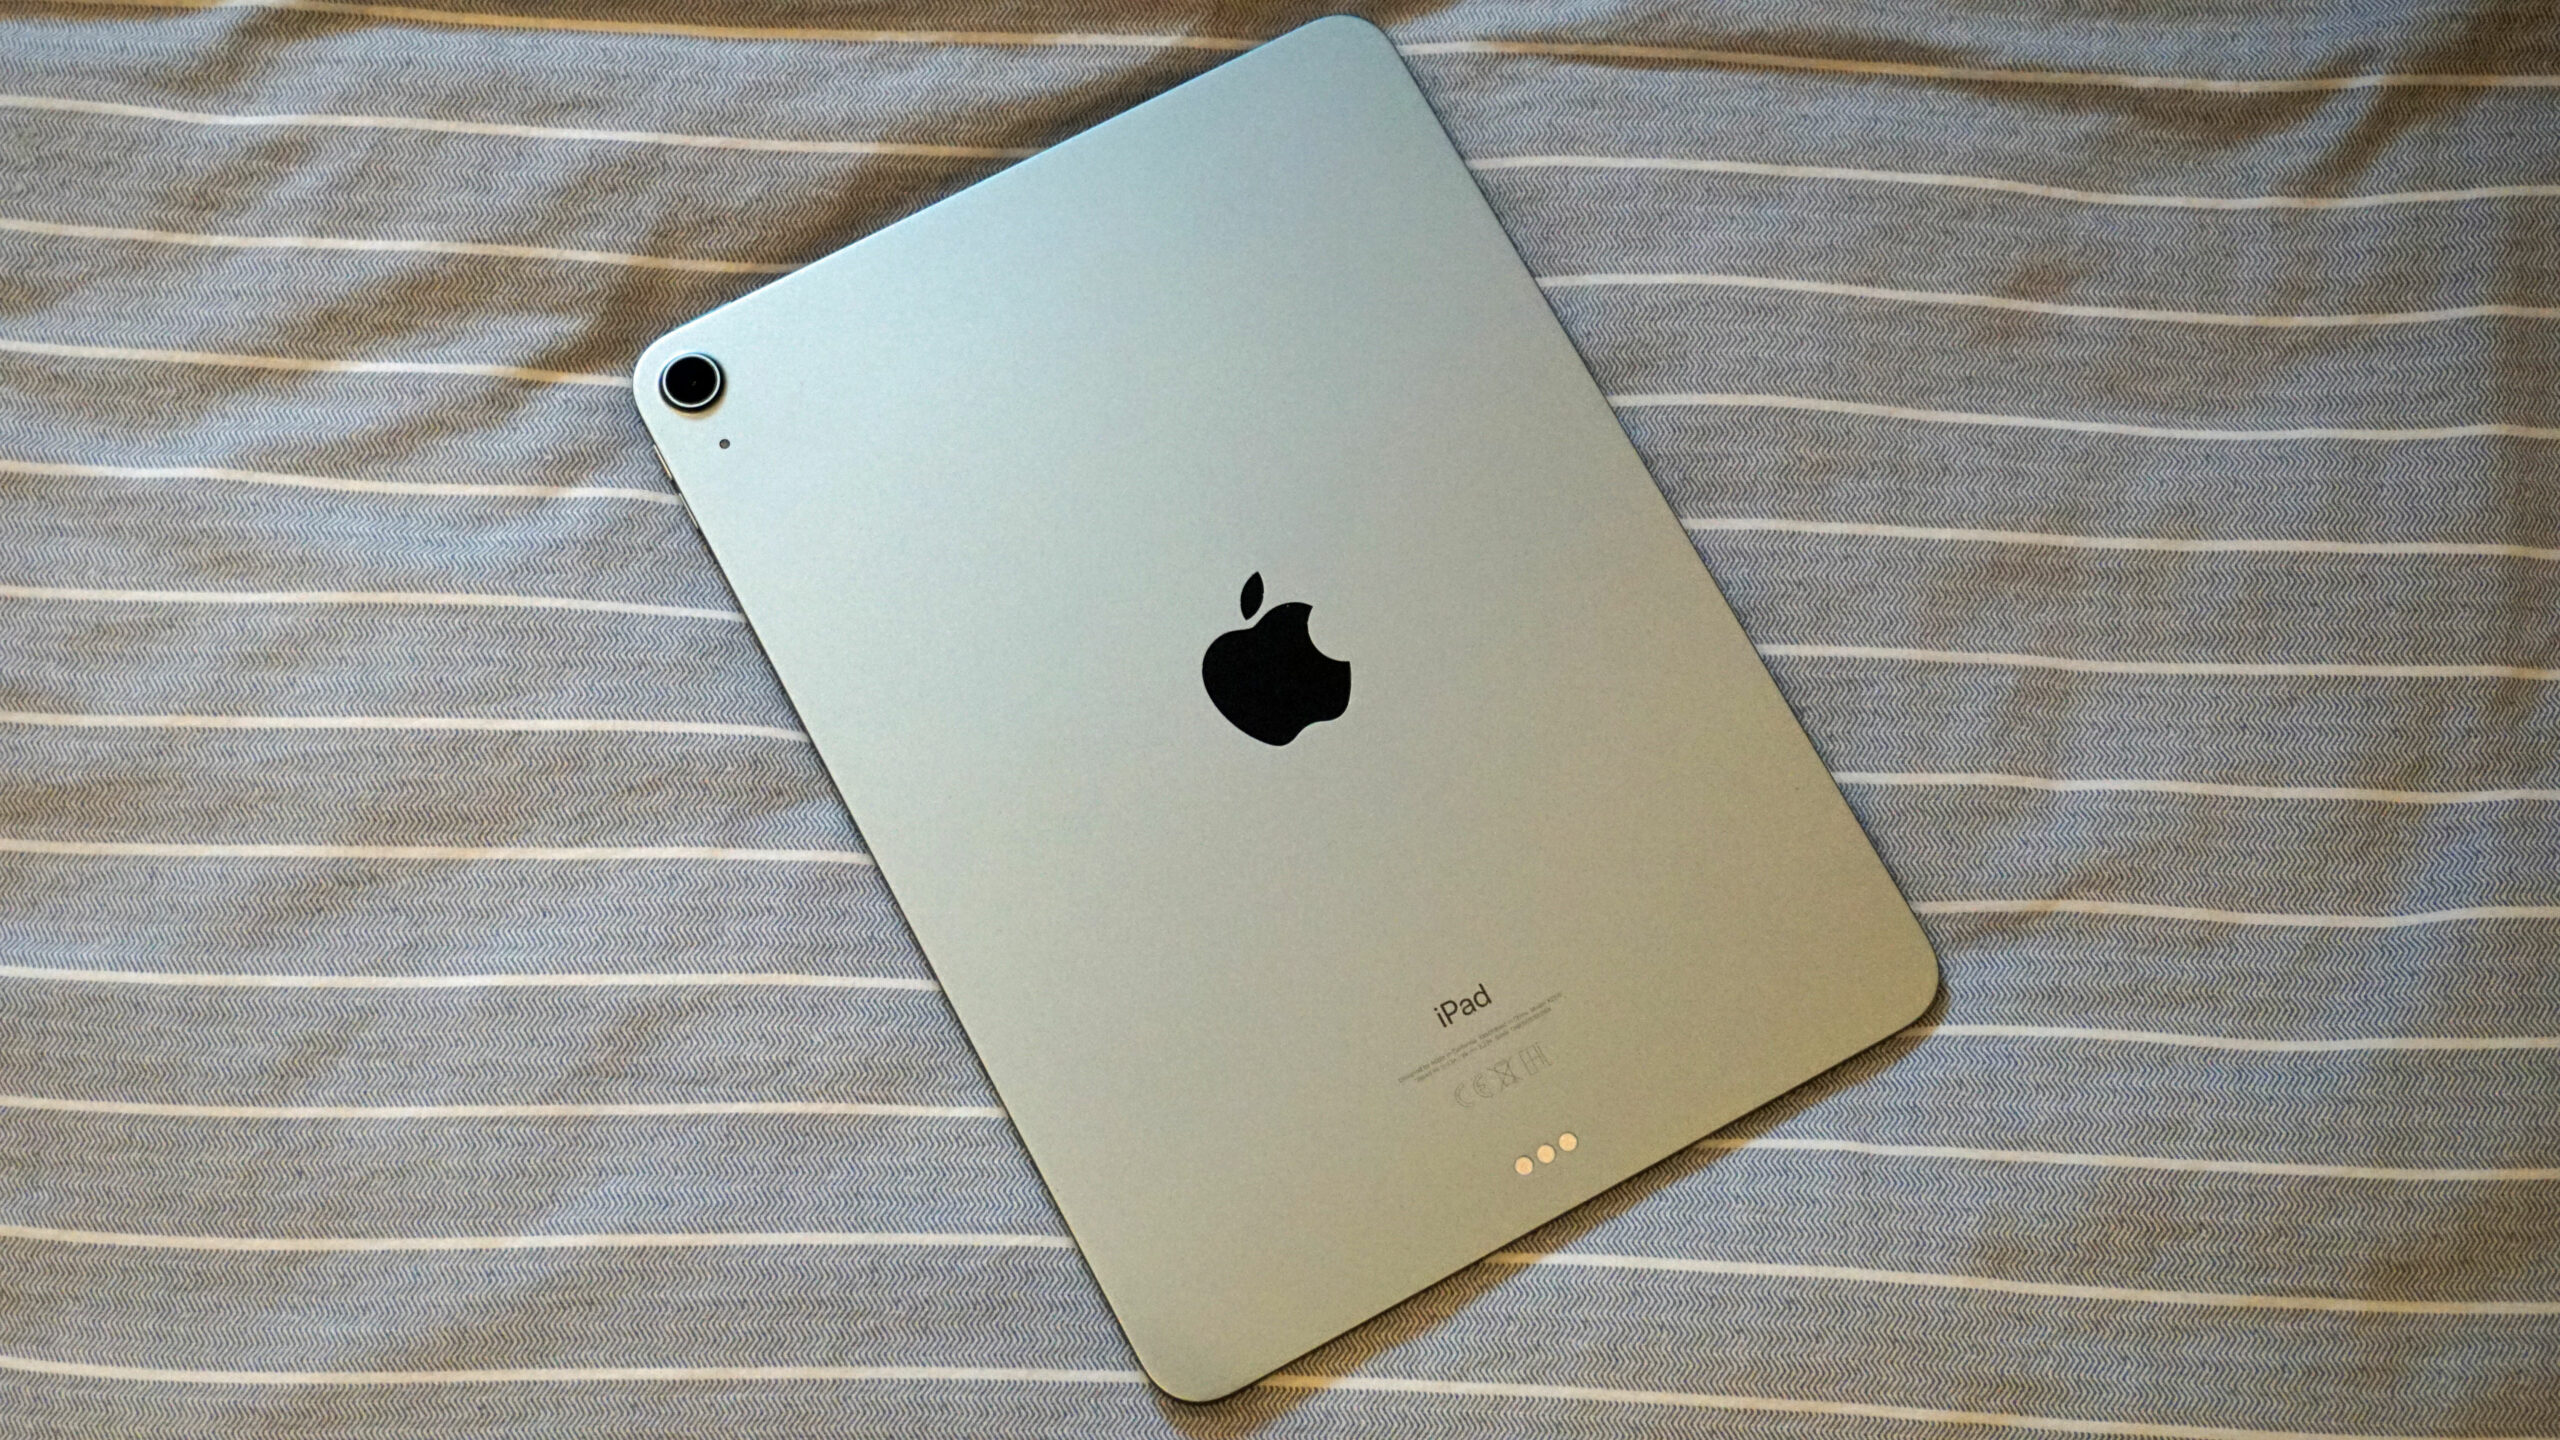 Apple iPad Air Plus Rumors and Speculations, Features and Release Date